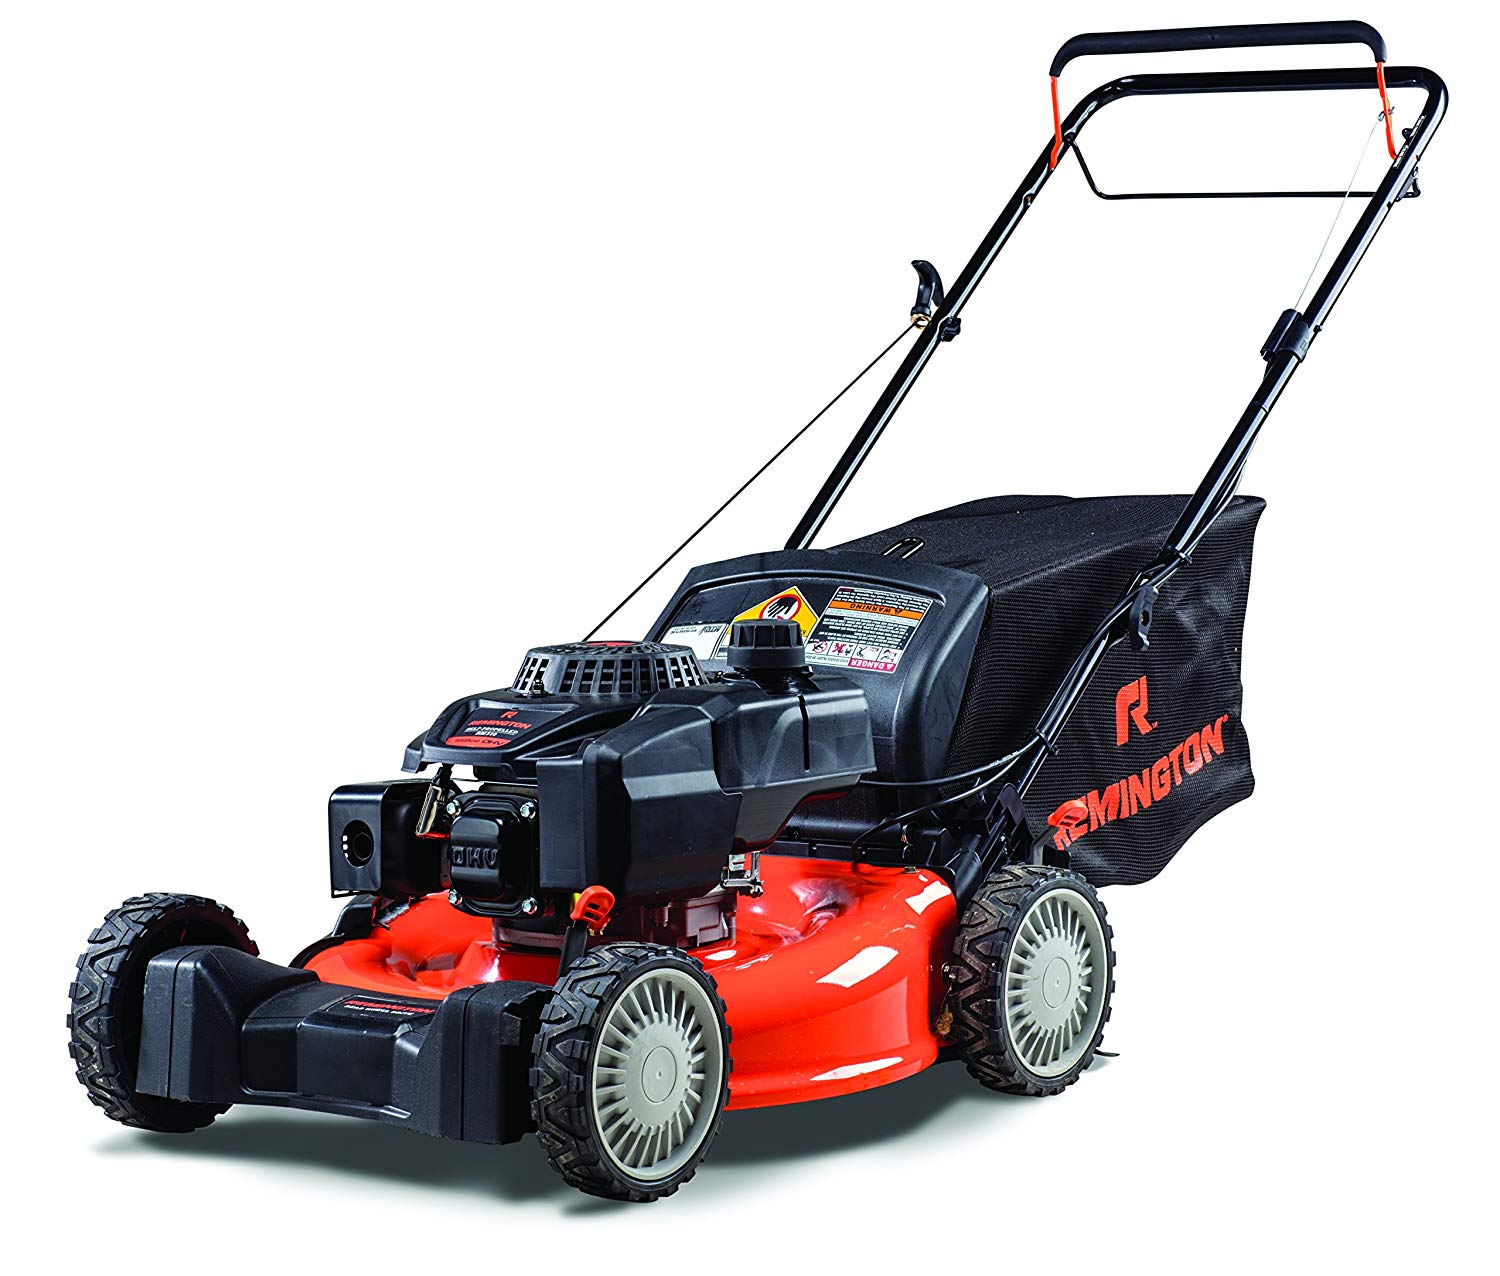 Best Self Propelled Lawn Mower at Power Equipment